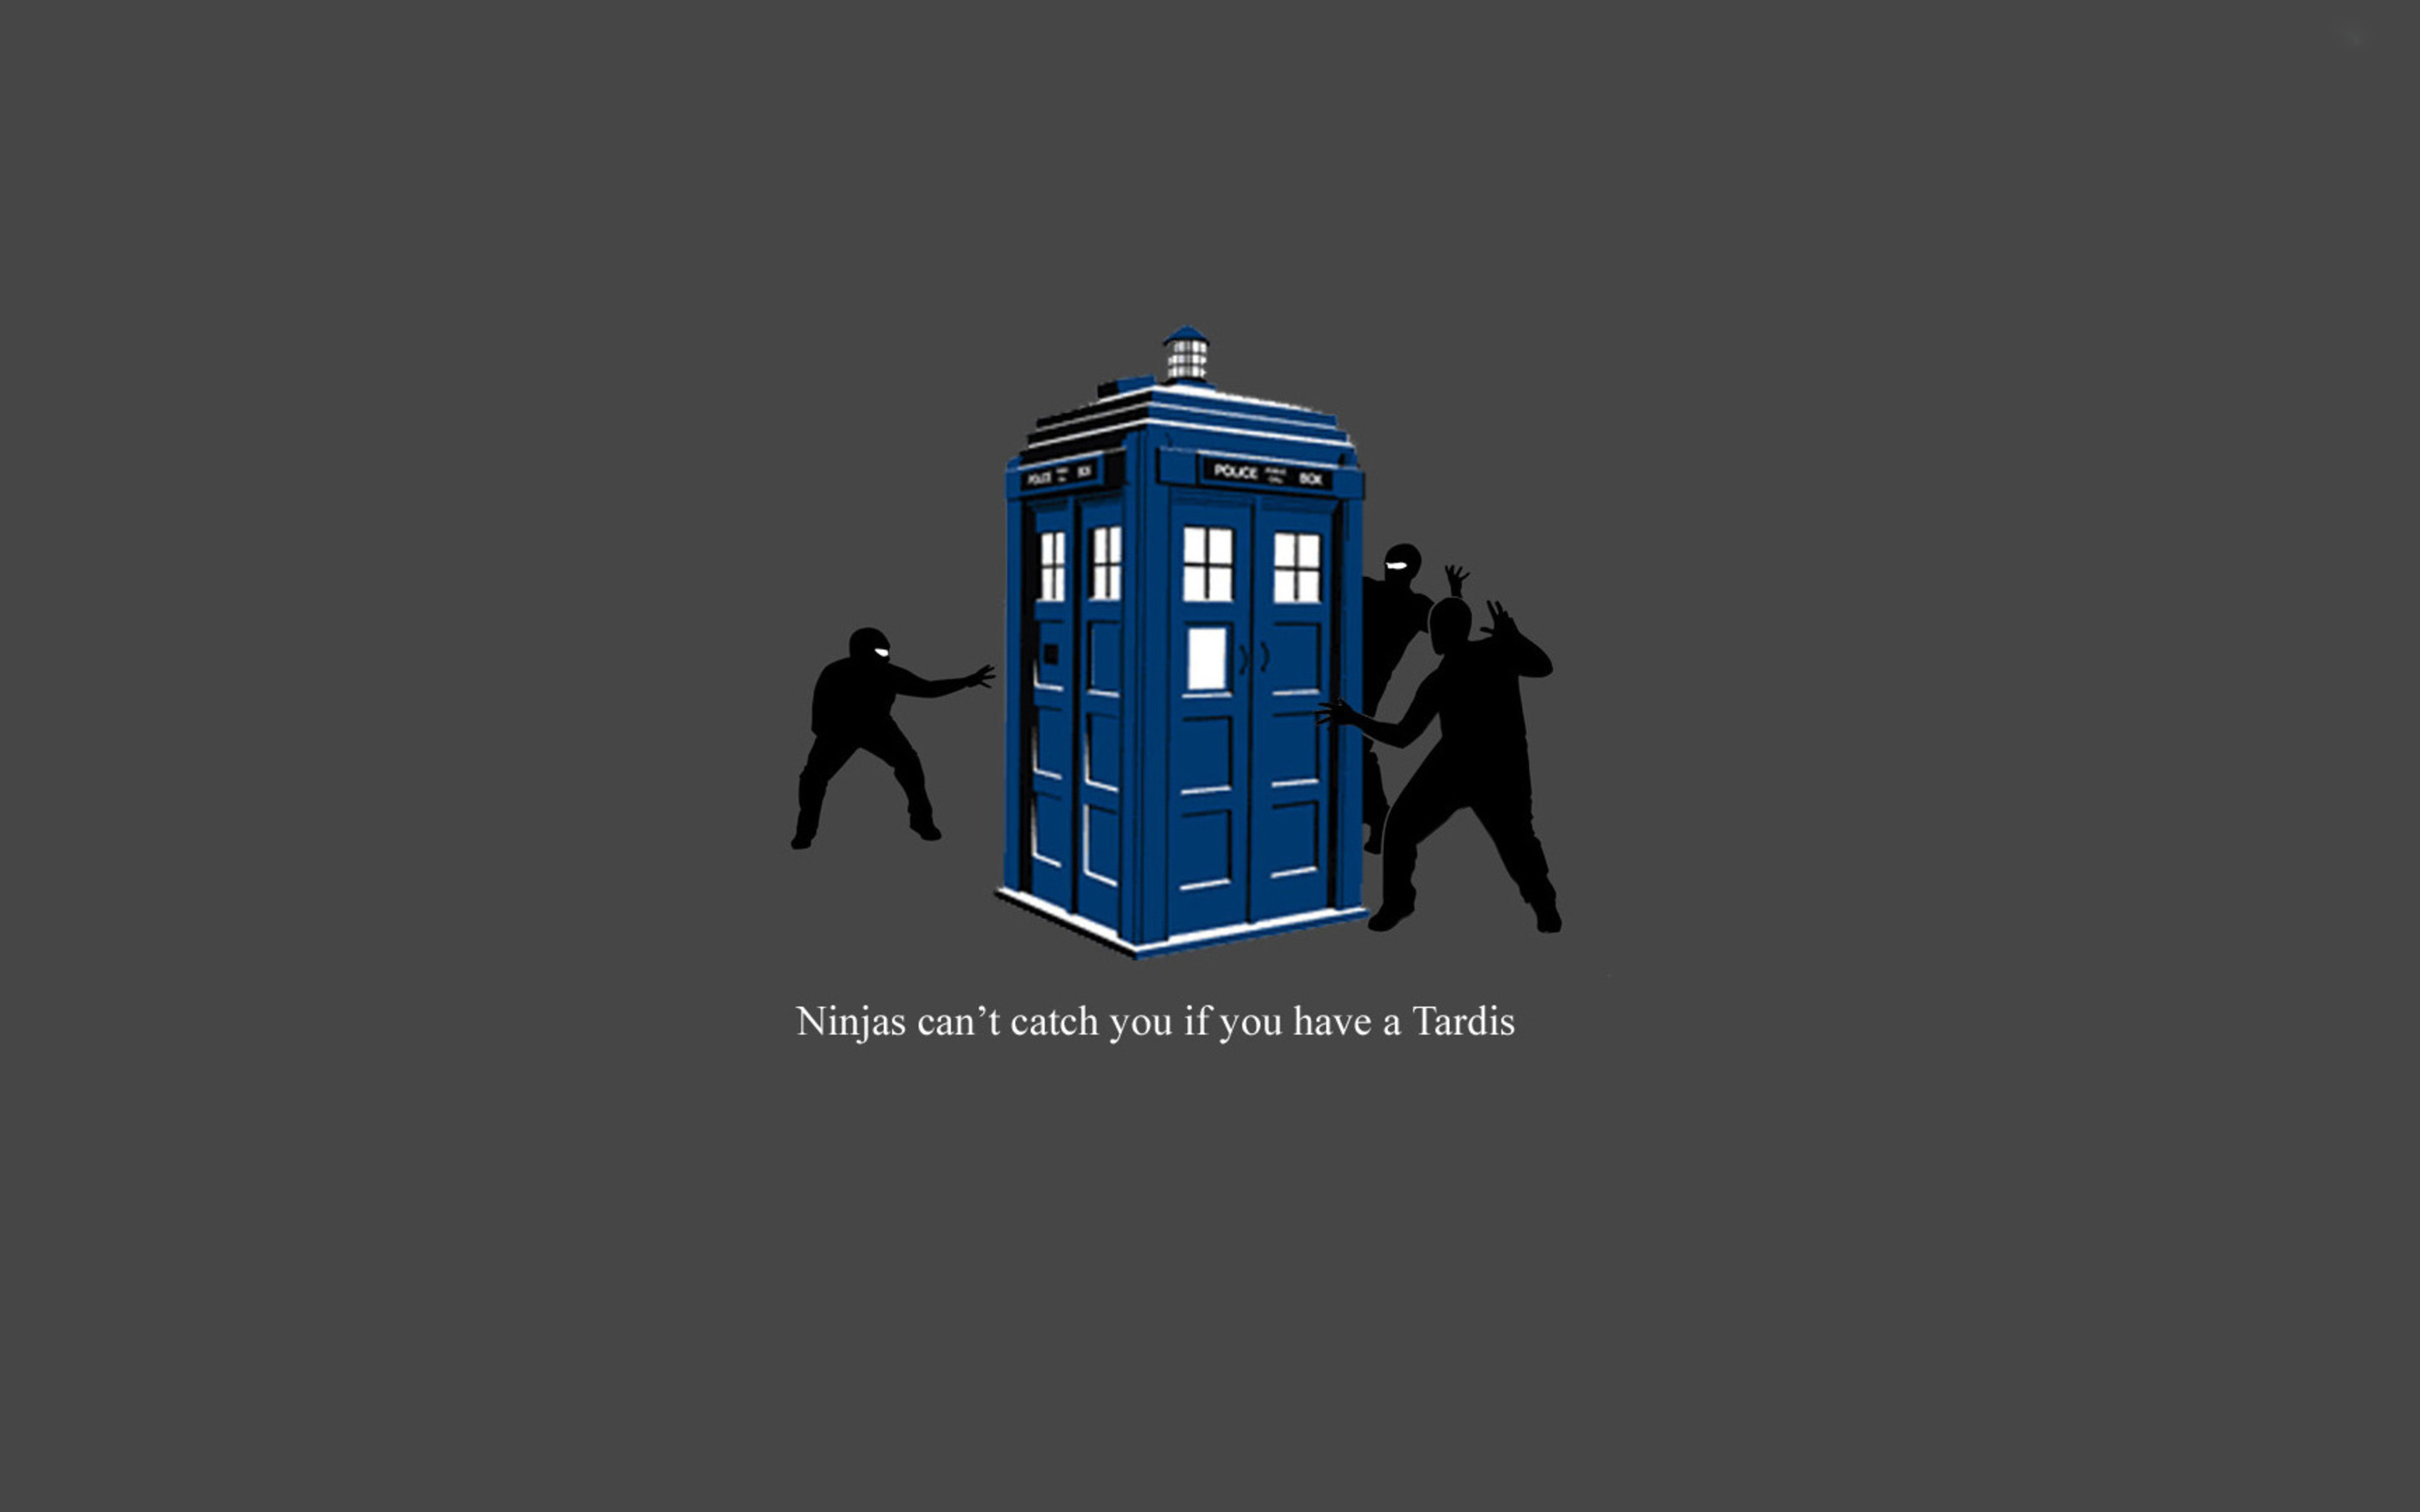 Ninjas can't catch you if you have a Tardis wallpaper